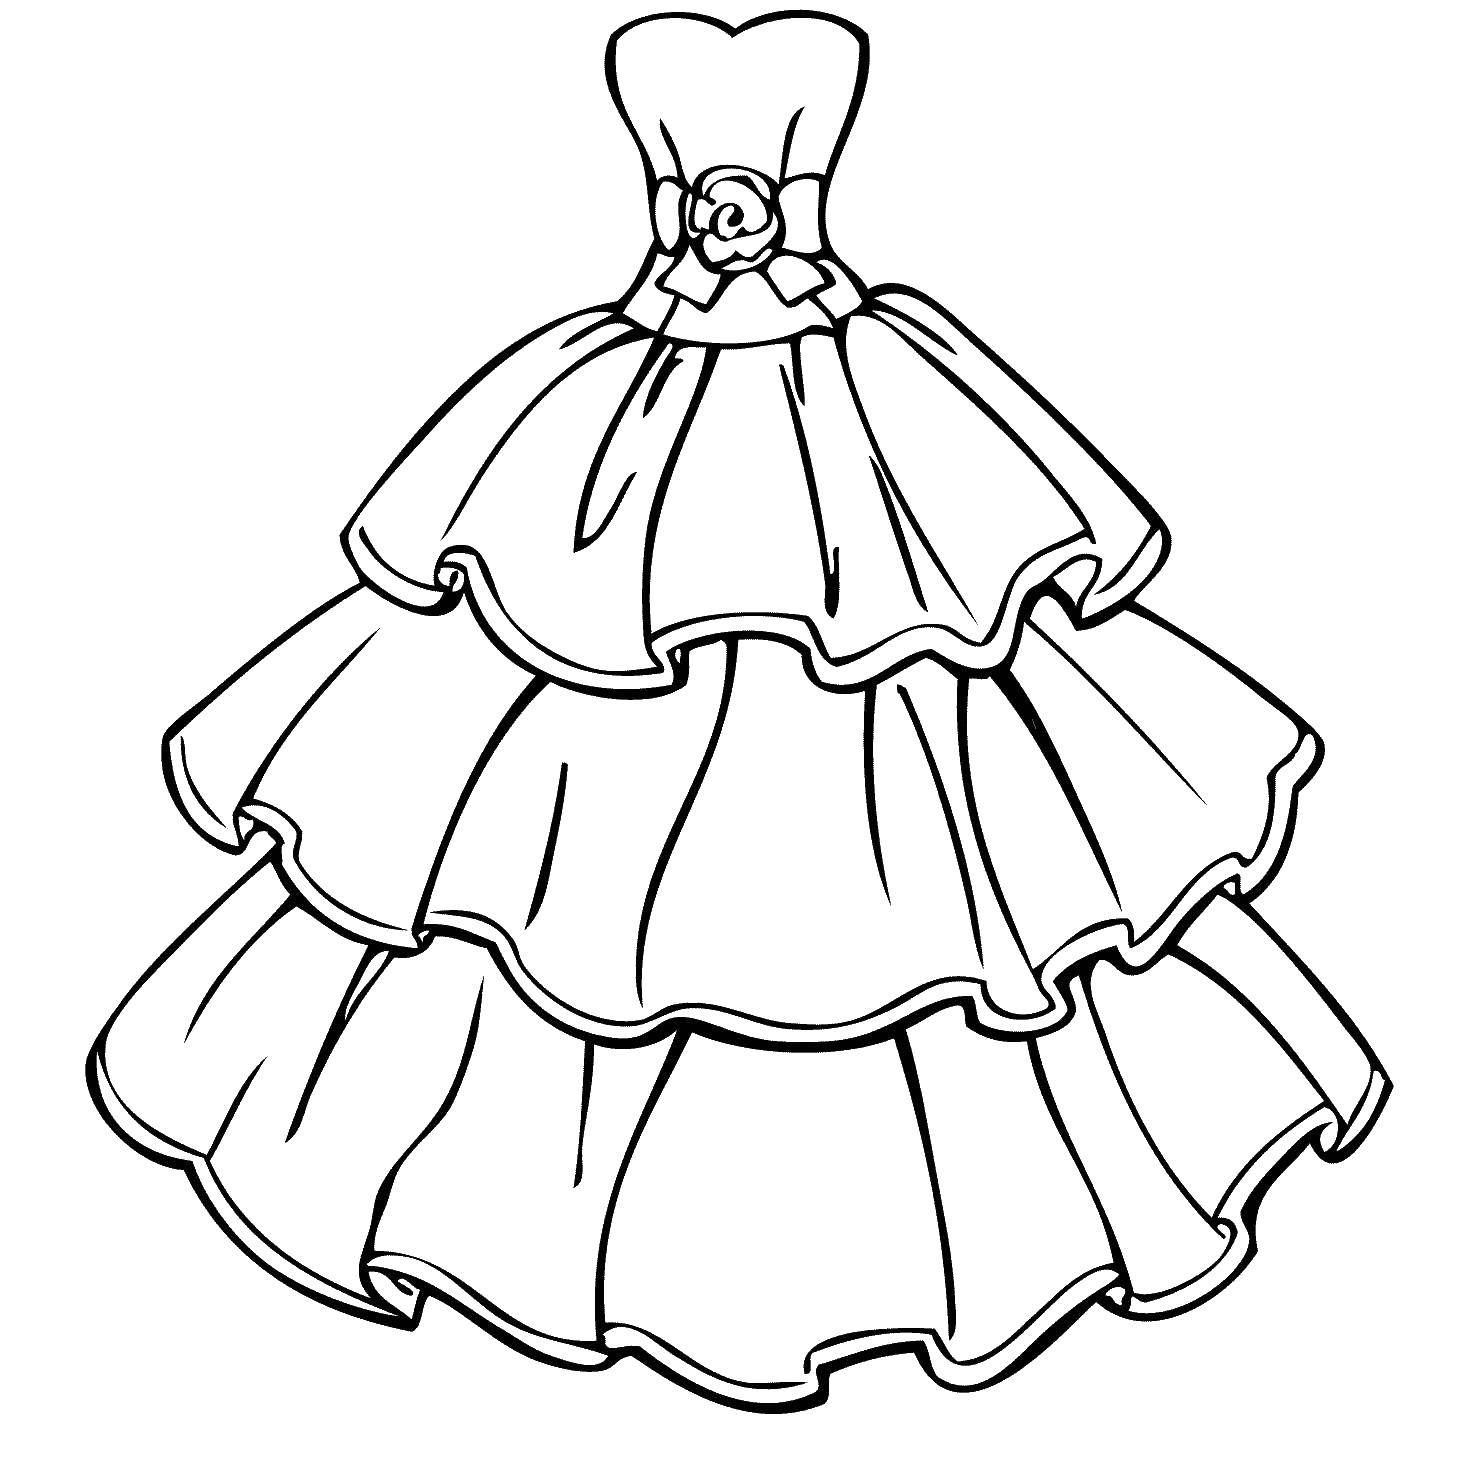 Coloring Quinceanera dresses with flower. Category Dress. Tags:  Clothing, dress.